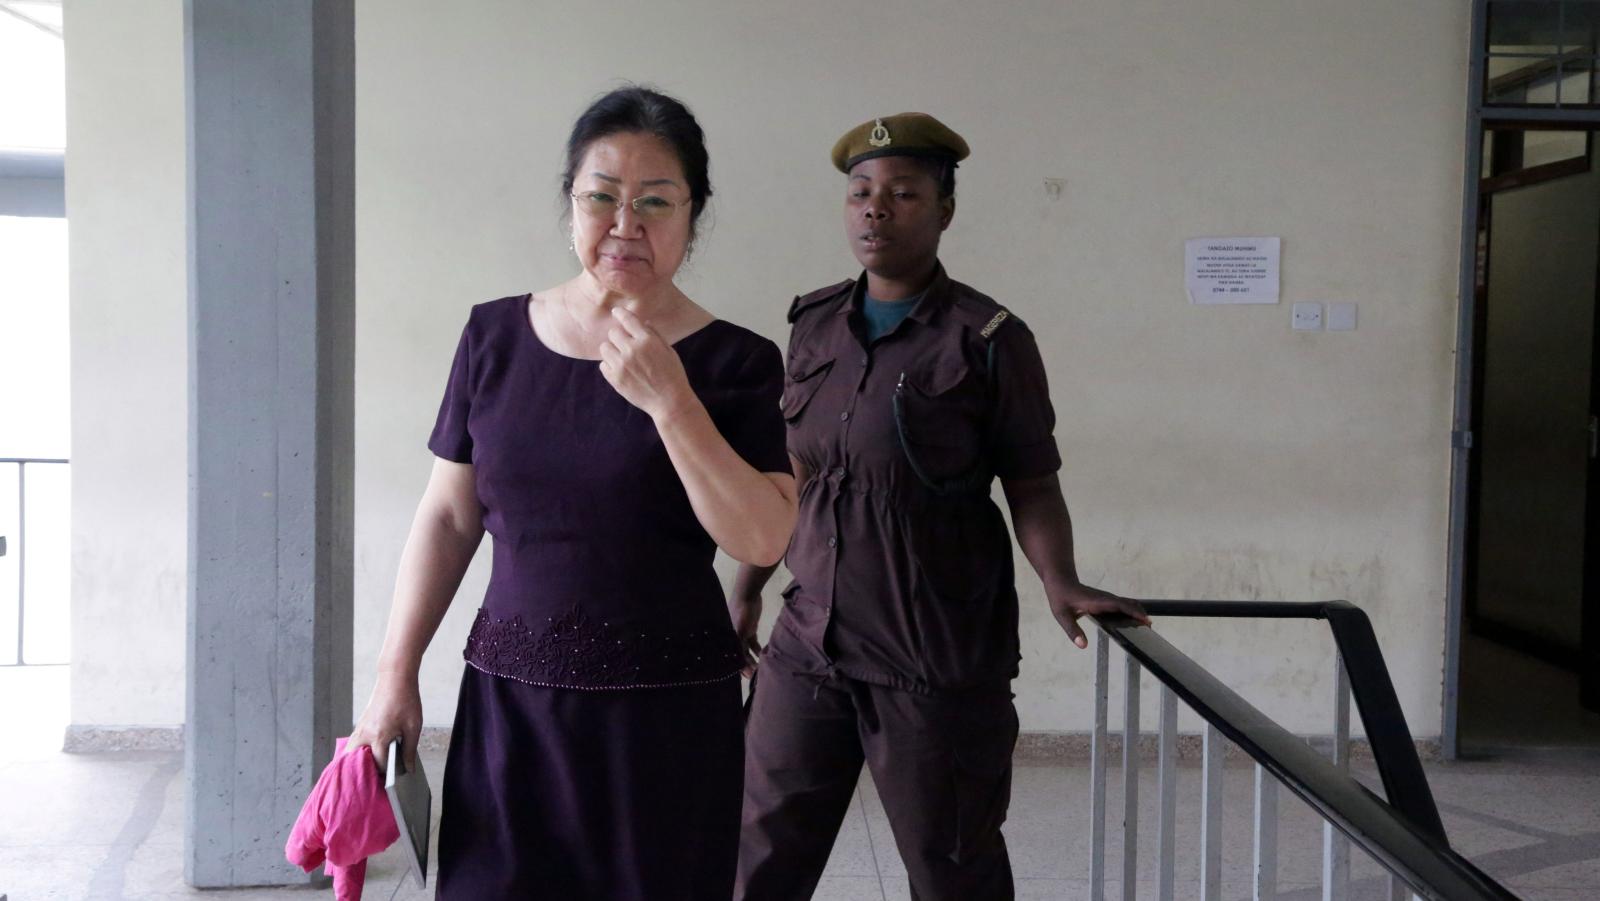 Chinese Ivory Queen has been sentenced to 15 years in a Tanzanian prison